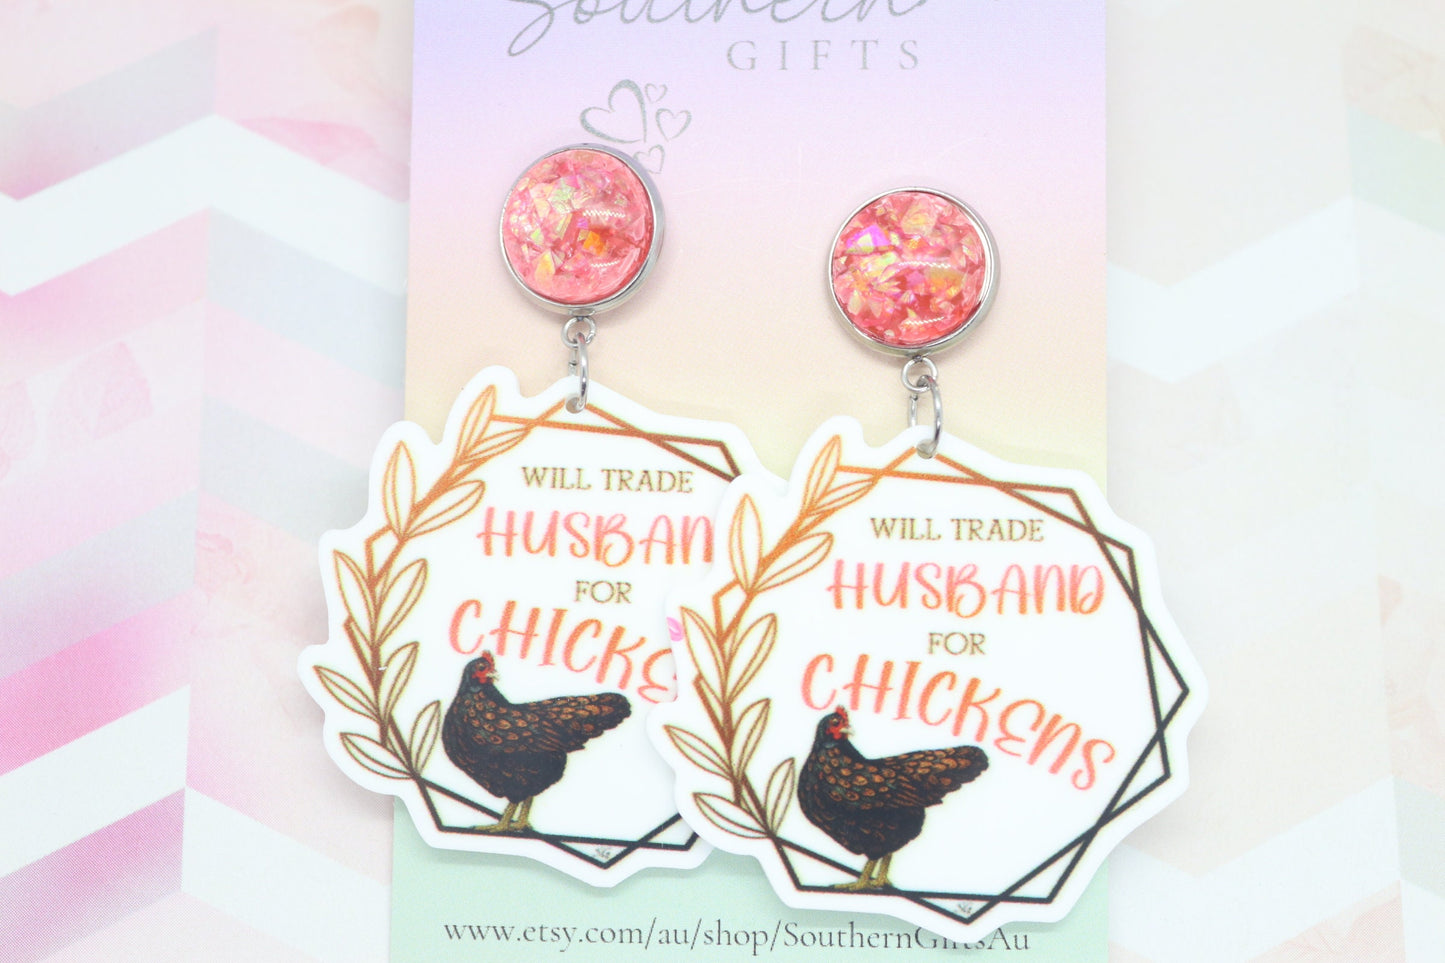 Standard Will Trade Husband For Chickens Statement Earrings